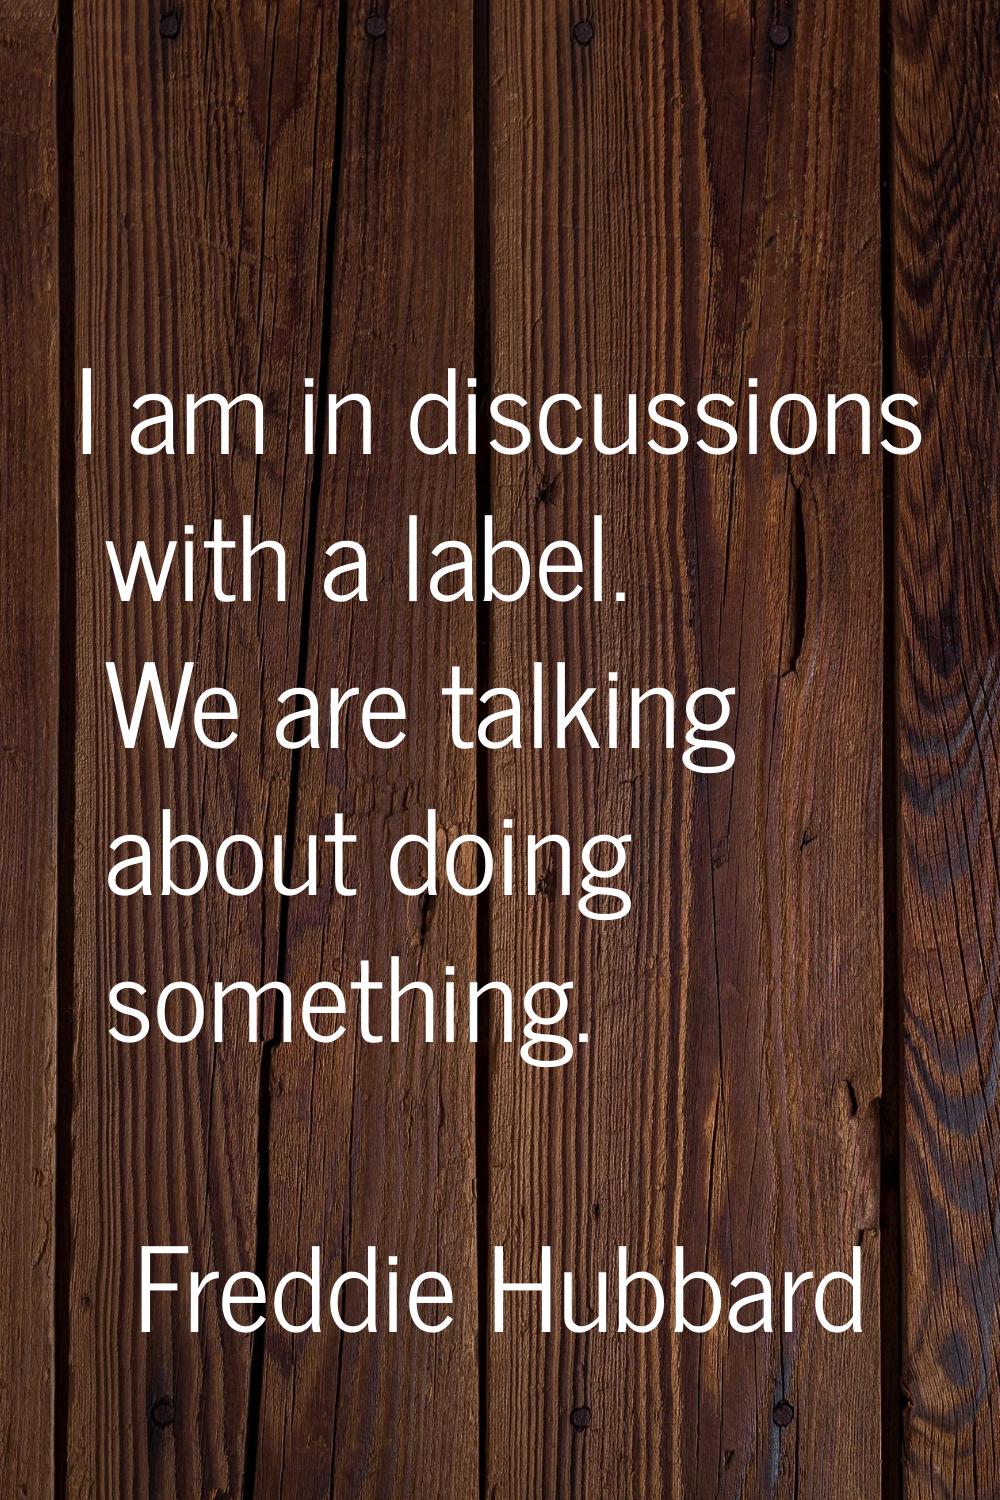 I am in discussions with a label. We are talking about doing something.